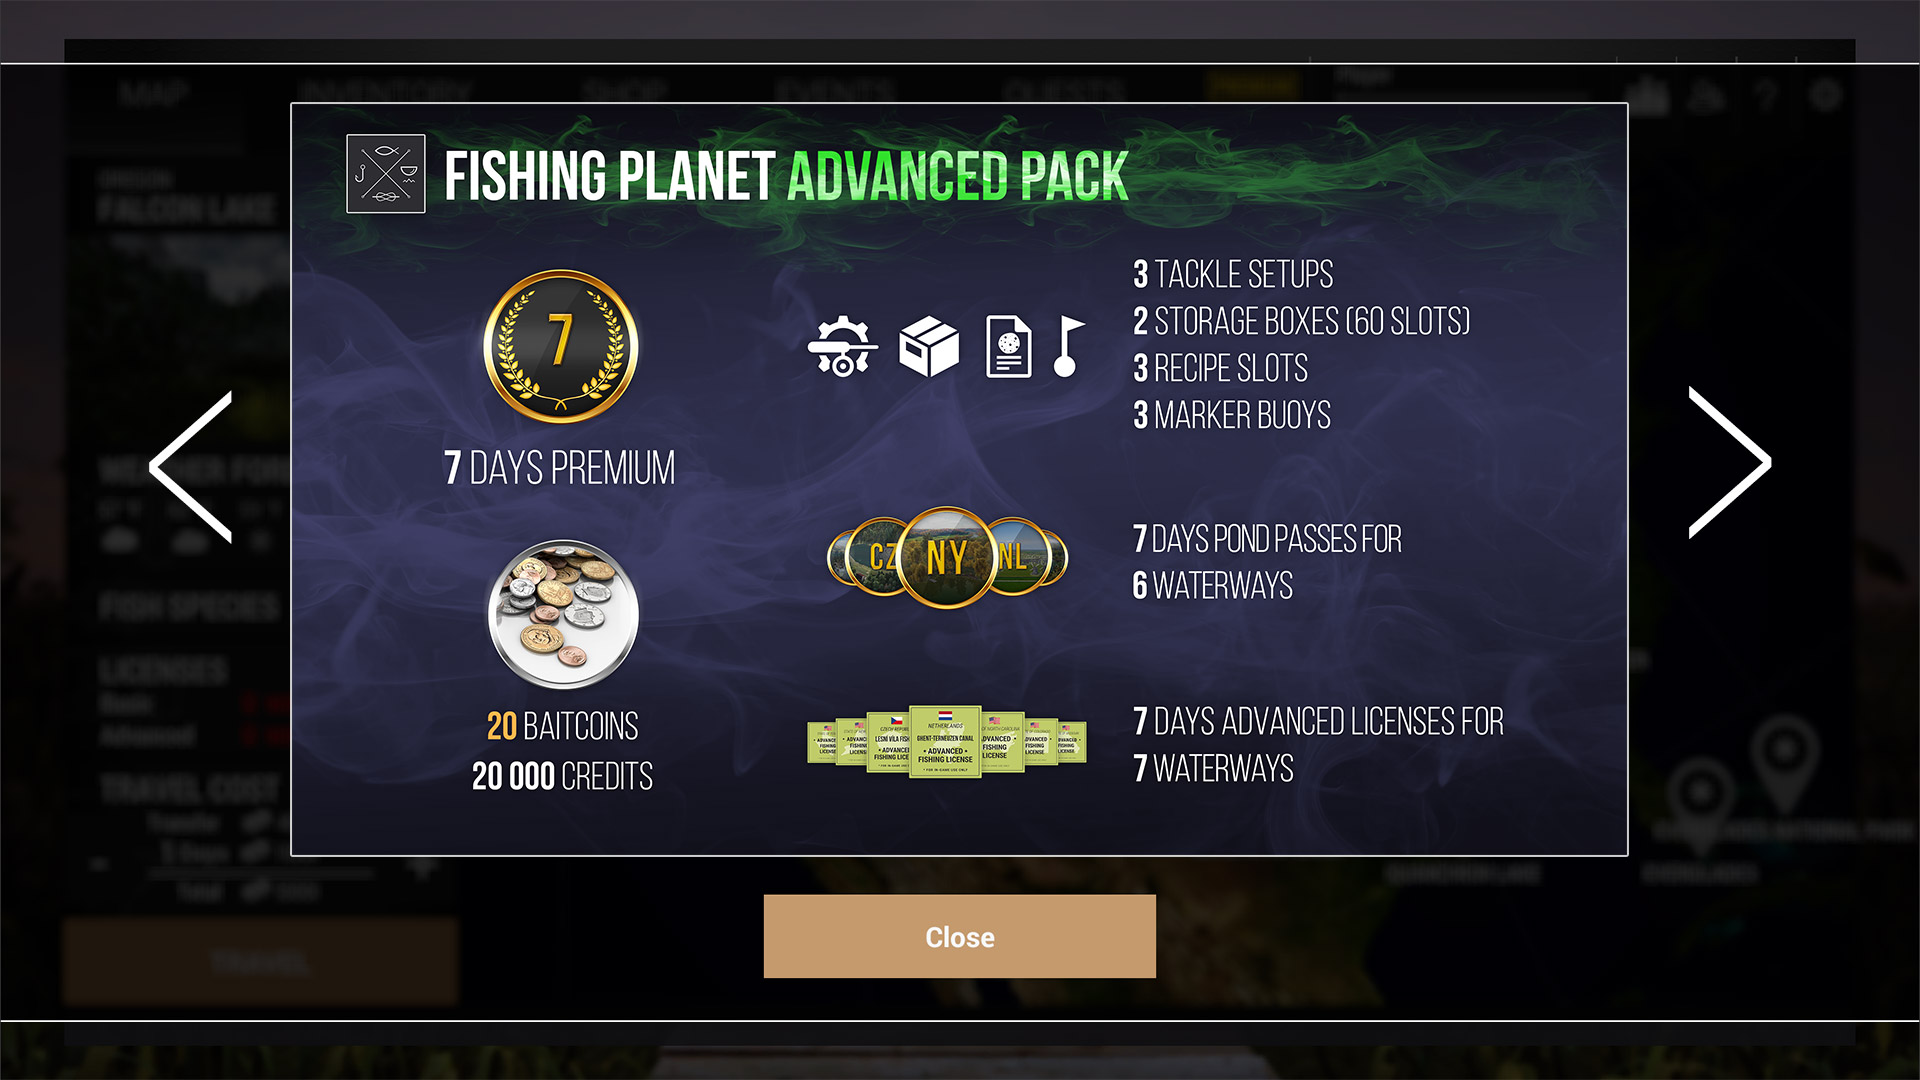 planet fishing tips ps4